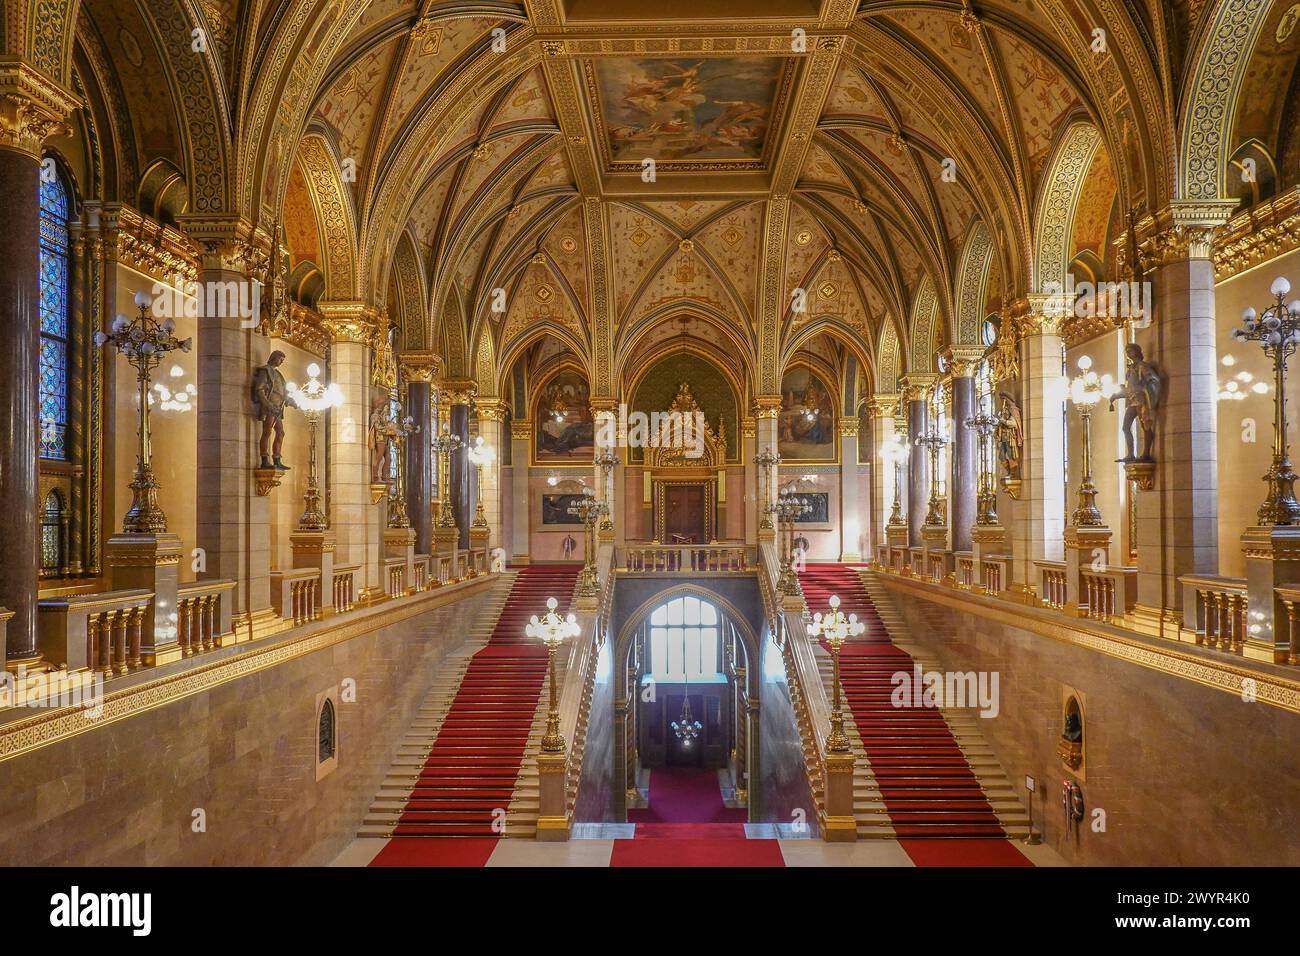 Hungary, Budapest, Interior of the House of Magnates of the Hungarian Parliament Building. The Hungarian Parliament Building also known as the Parliam Stock Photo